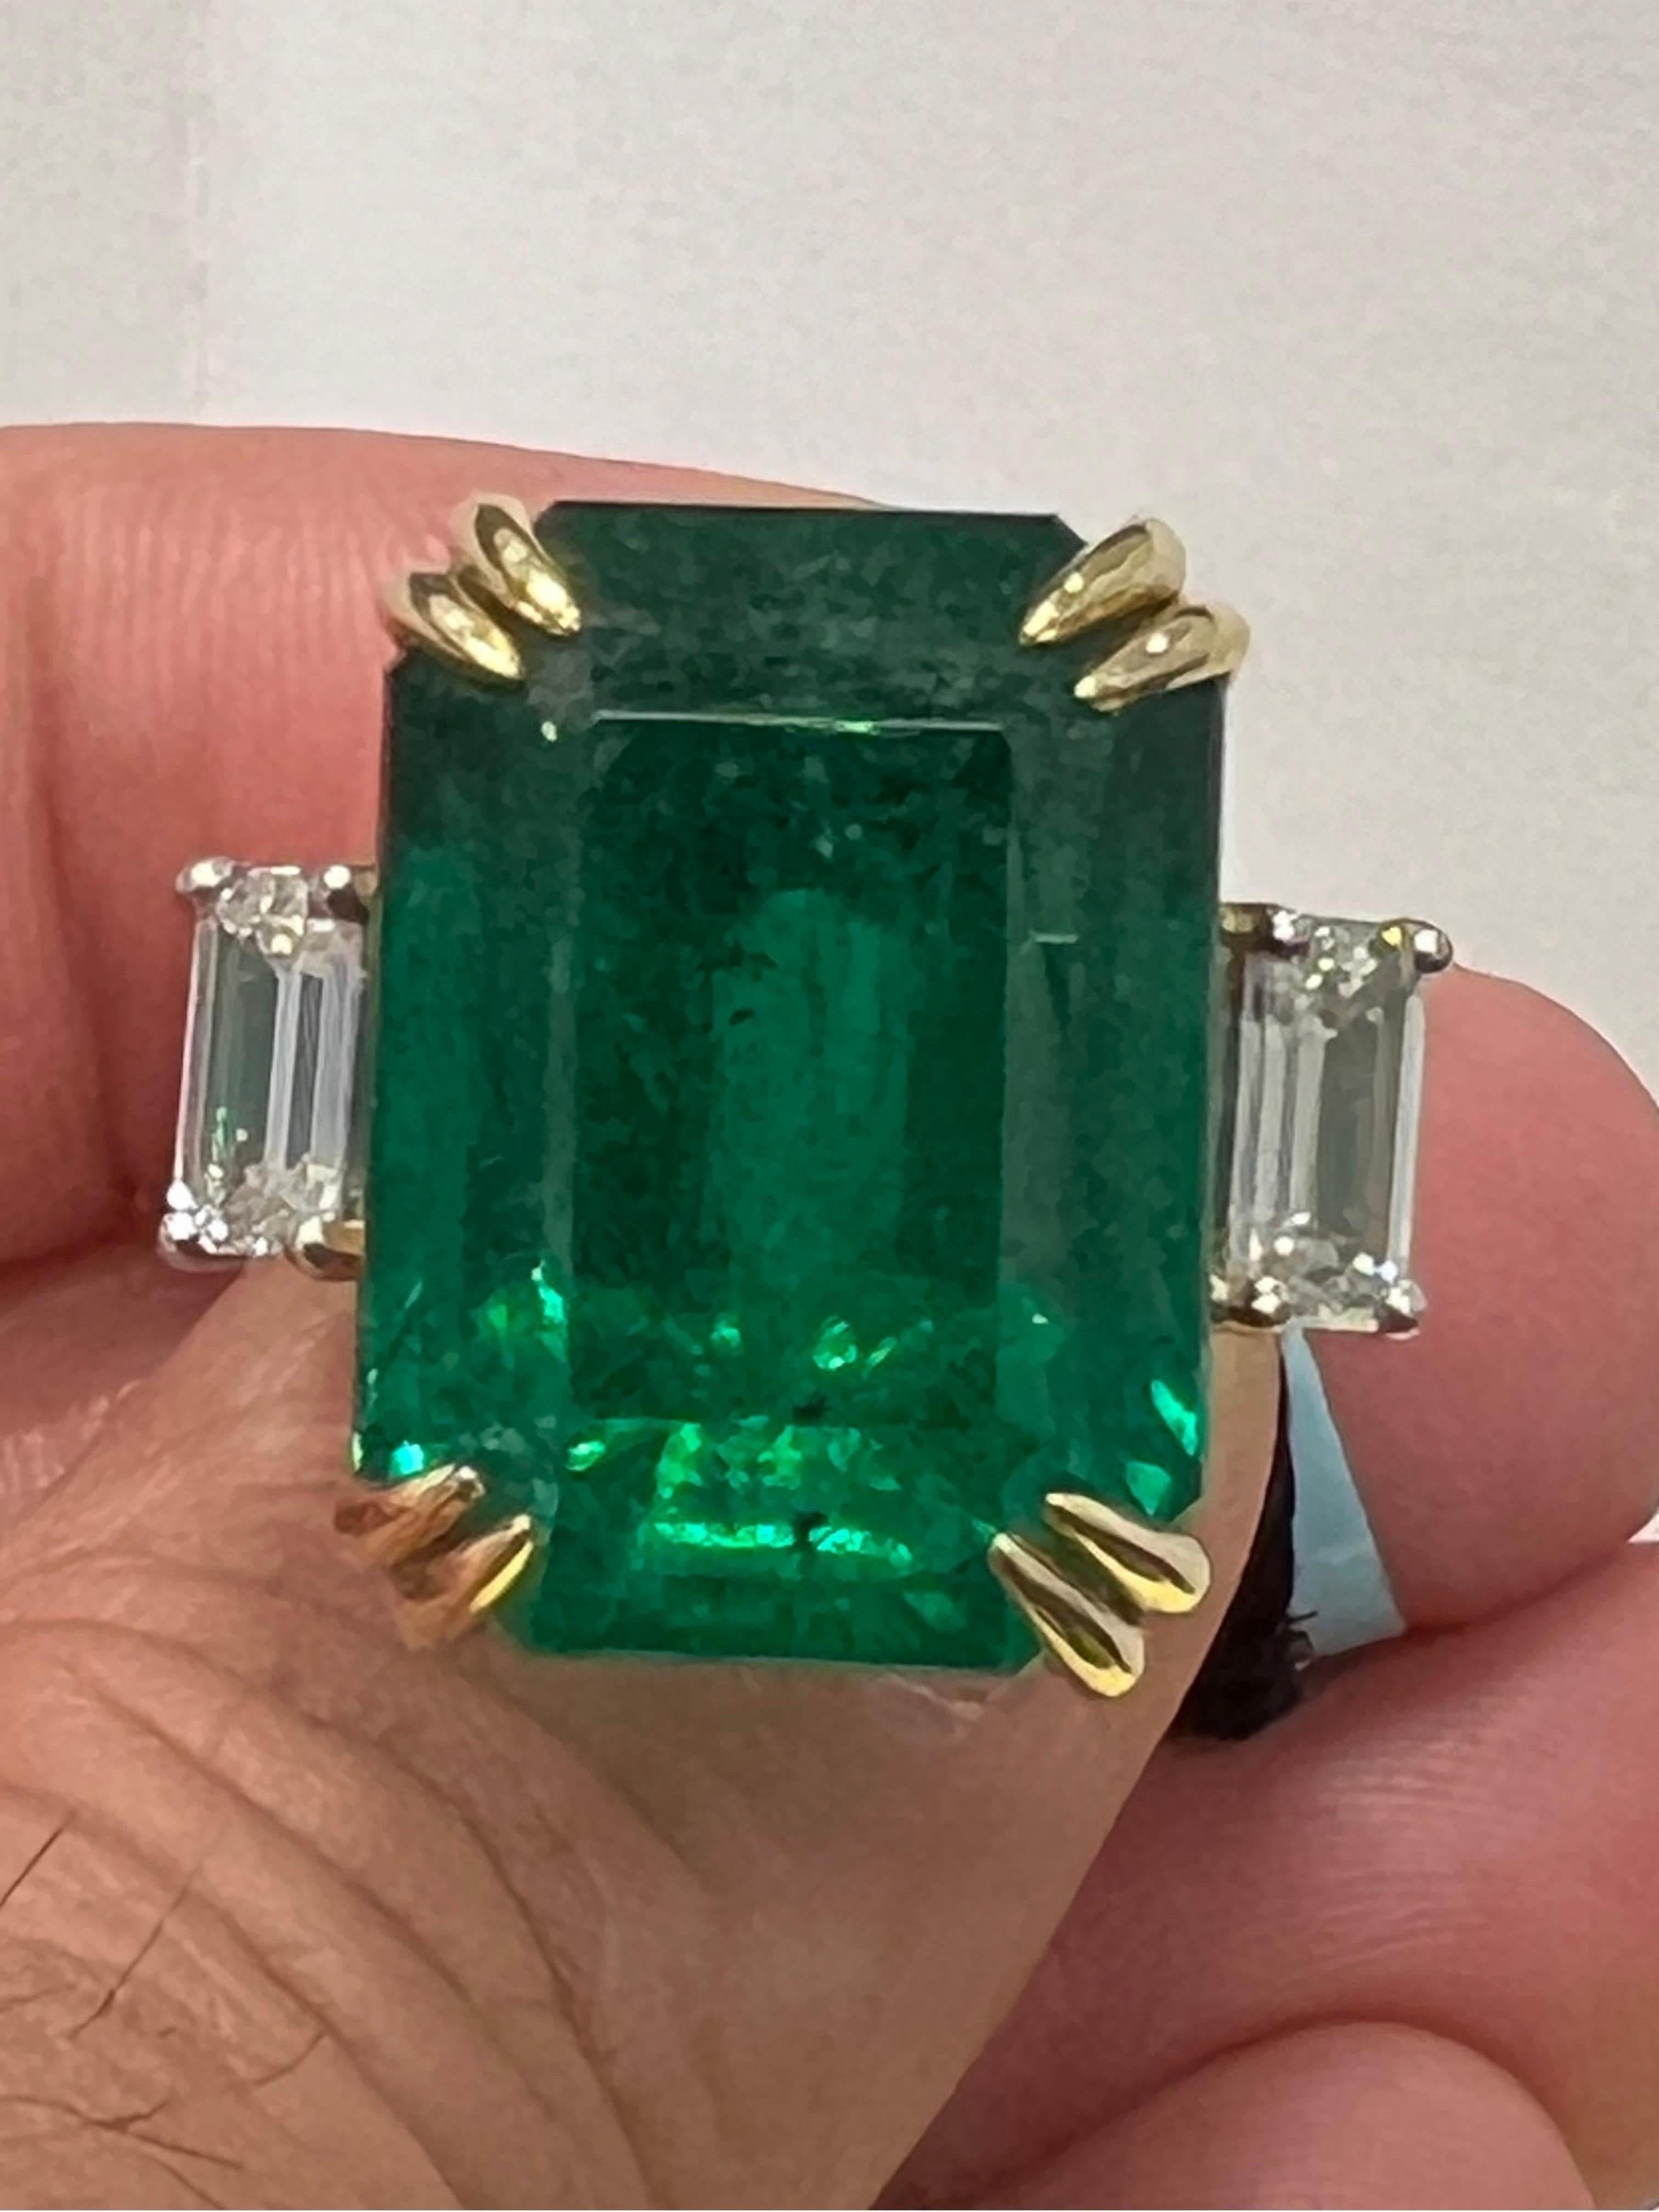 Extremely beautiful 30.27 carat emerald Octagon and two diamonds 0.70 and 0.71 carat emerald cut on either side is set in 18K two tone gold. You can easily resize the ring 2 size up and down if needed.  If you need more Picture and information,